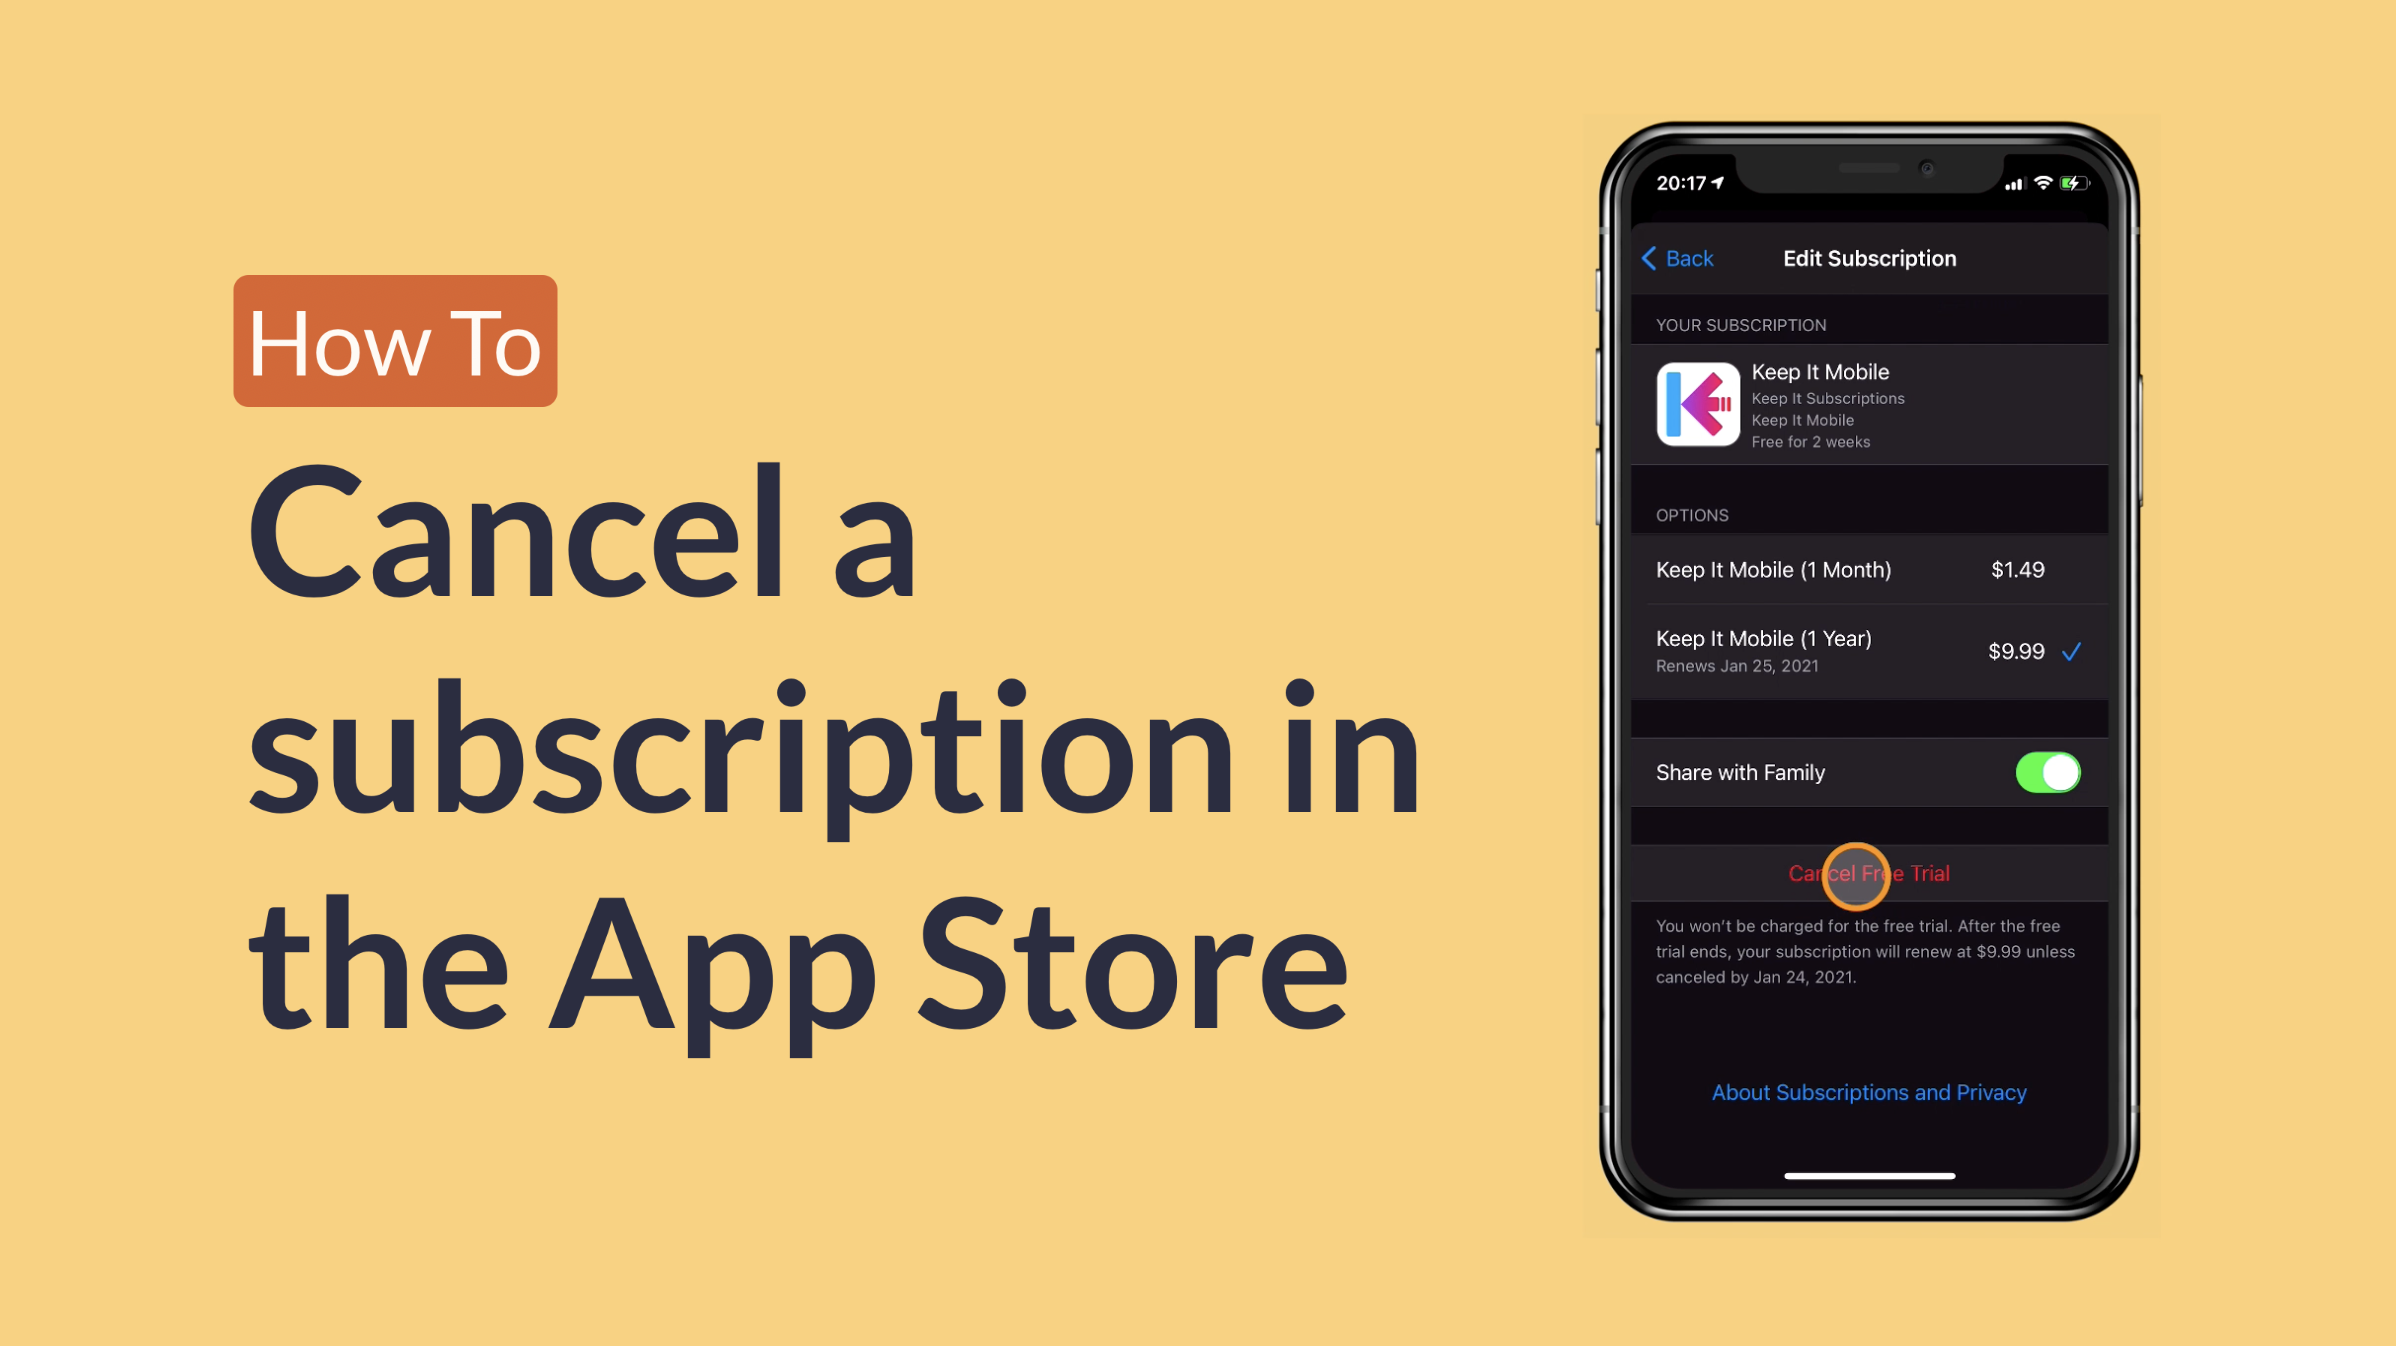 Discover how to cancel a subscription in the App Store and more on Tech Lifesavers